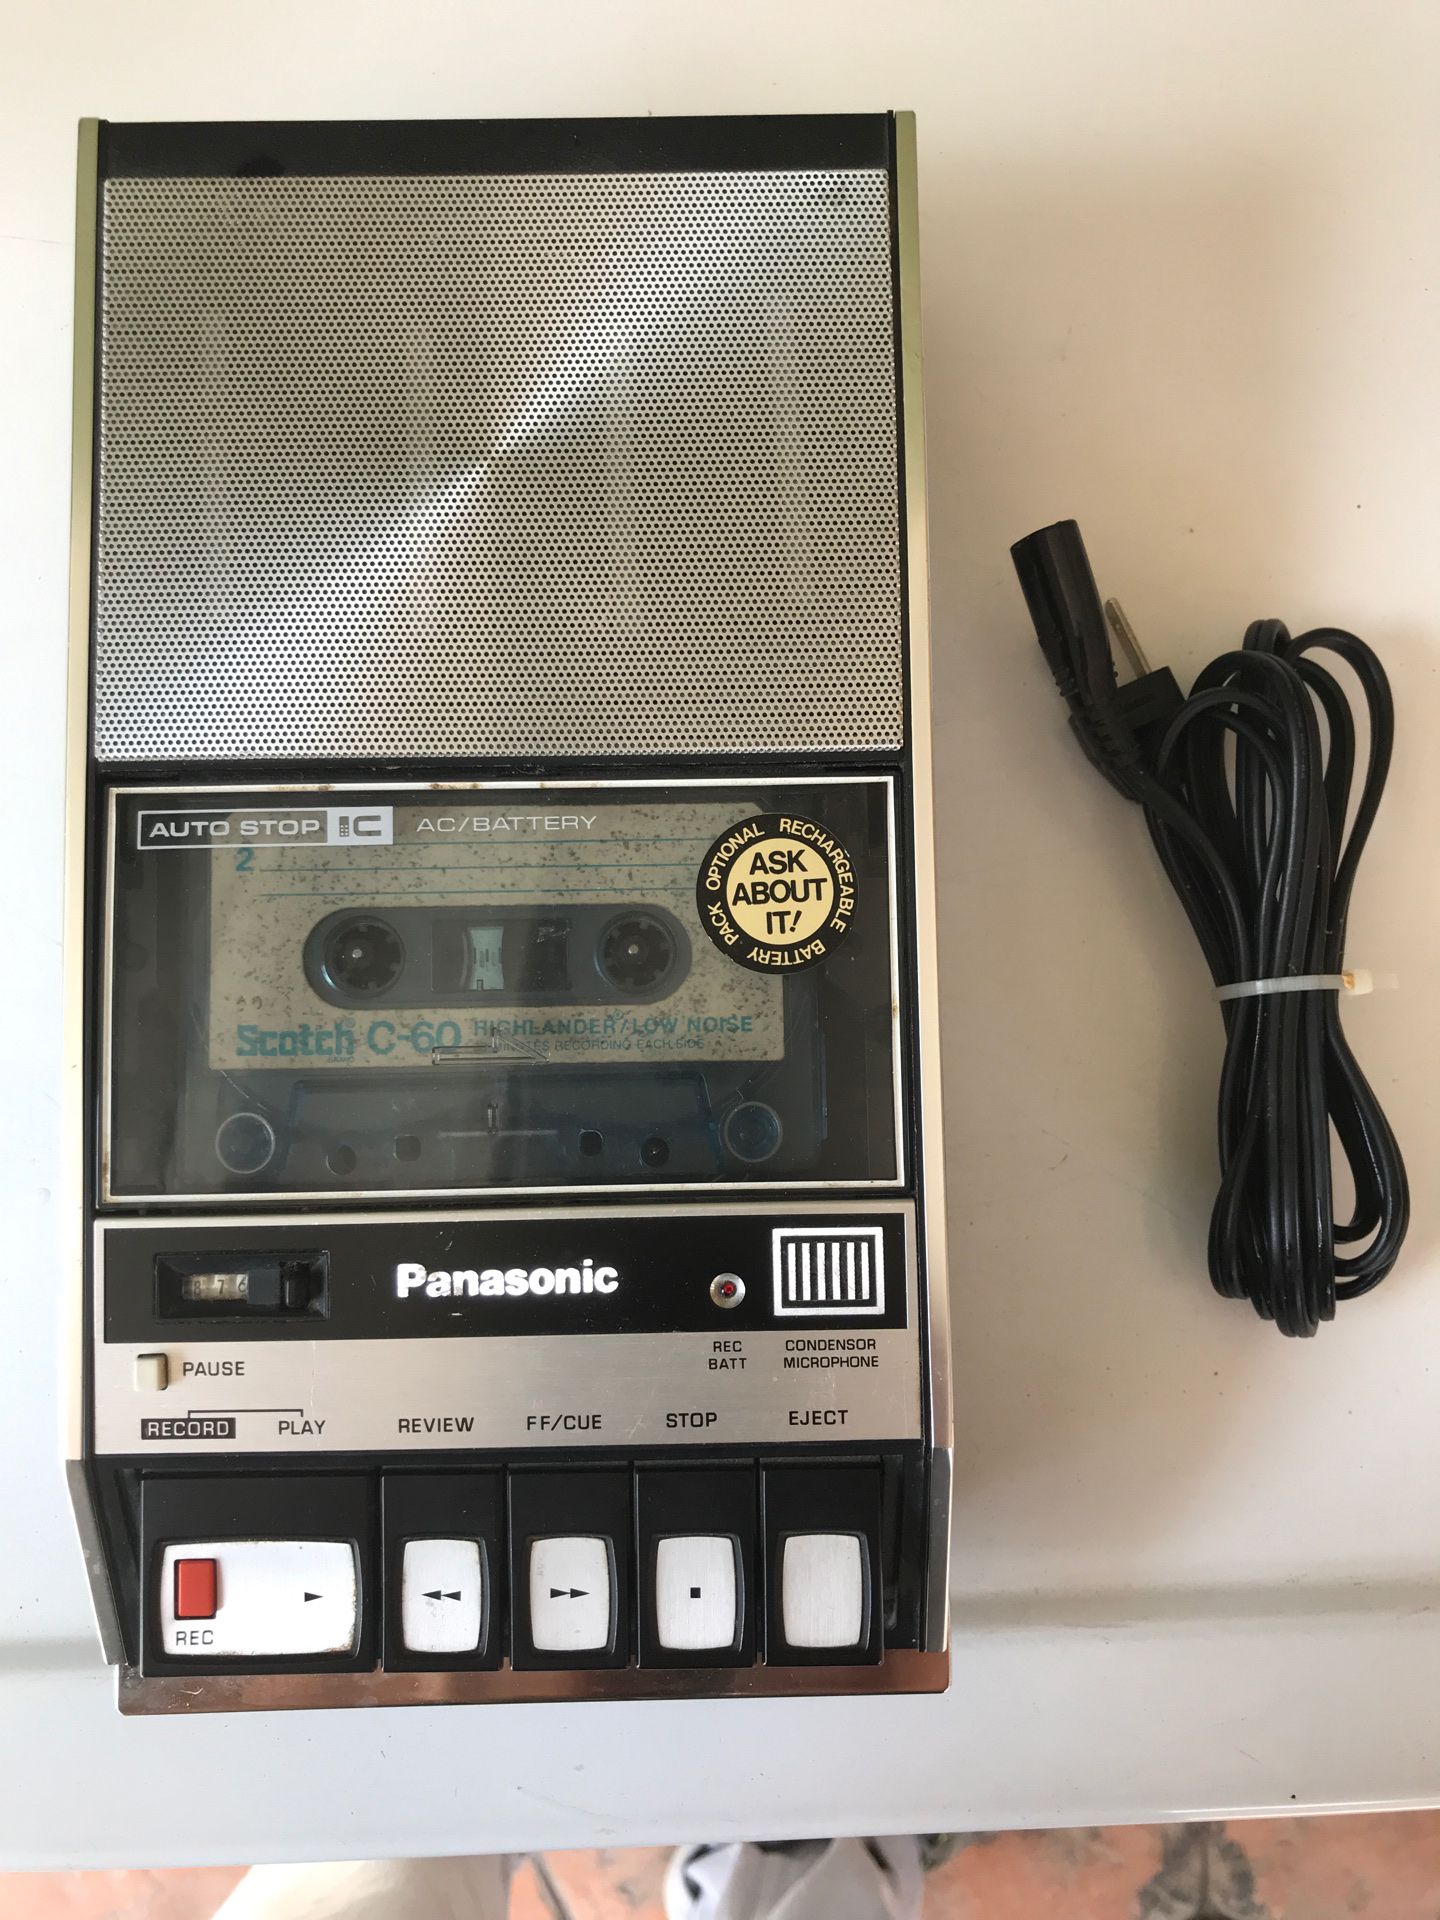 Cassette player from the 80’s bought this new 32 years ago intact like new I think I used it around 5 times all adoptions for recording